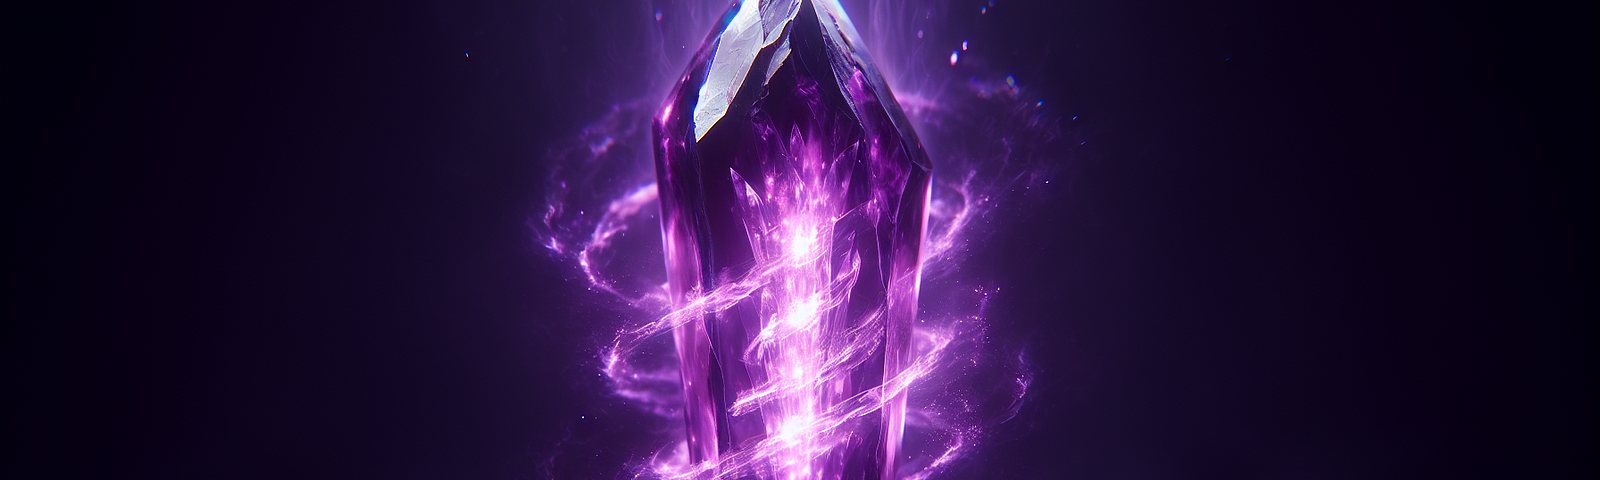 Floating purple crystal emanating a malignant purple aura, pulsating with the souls of the damned.